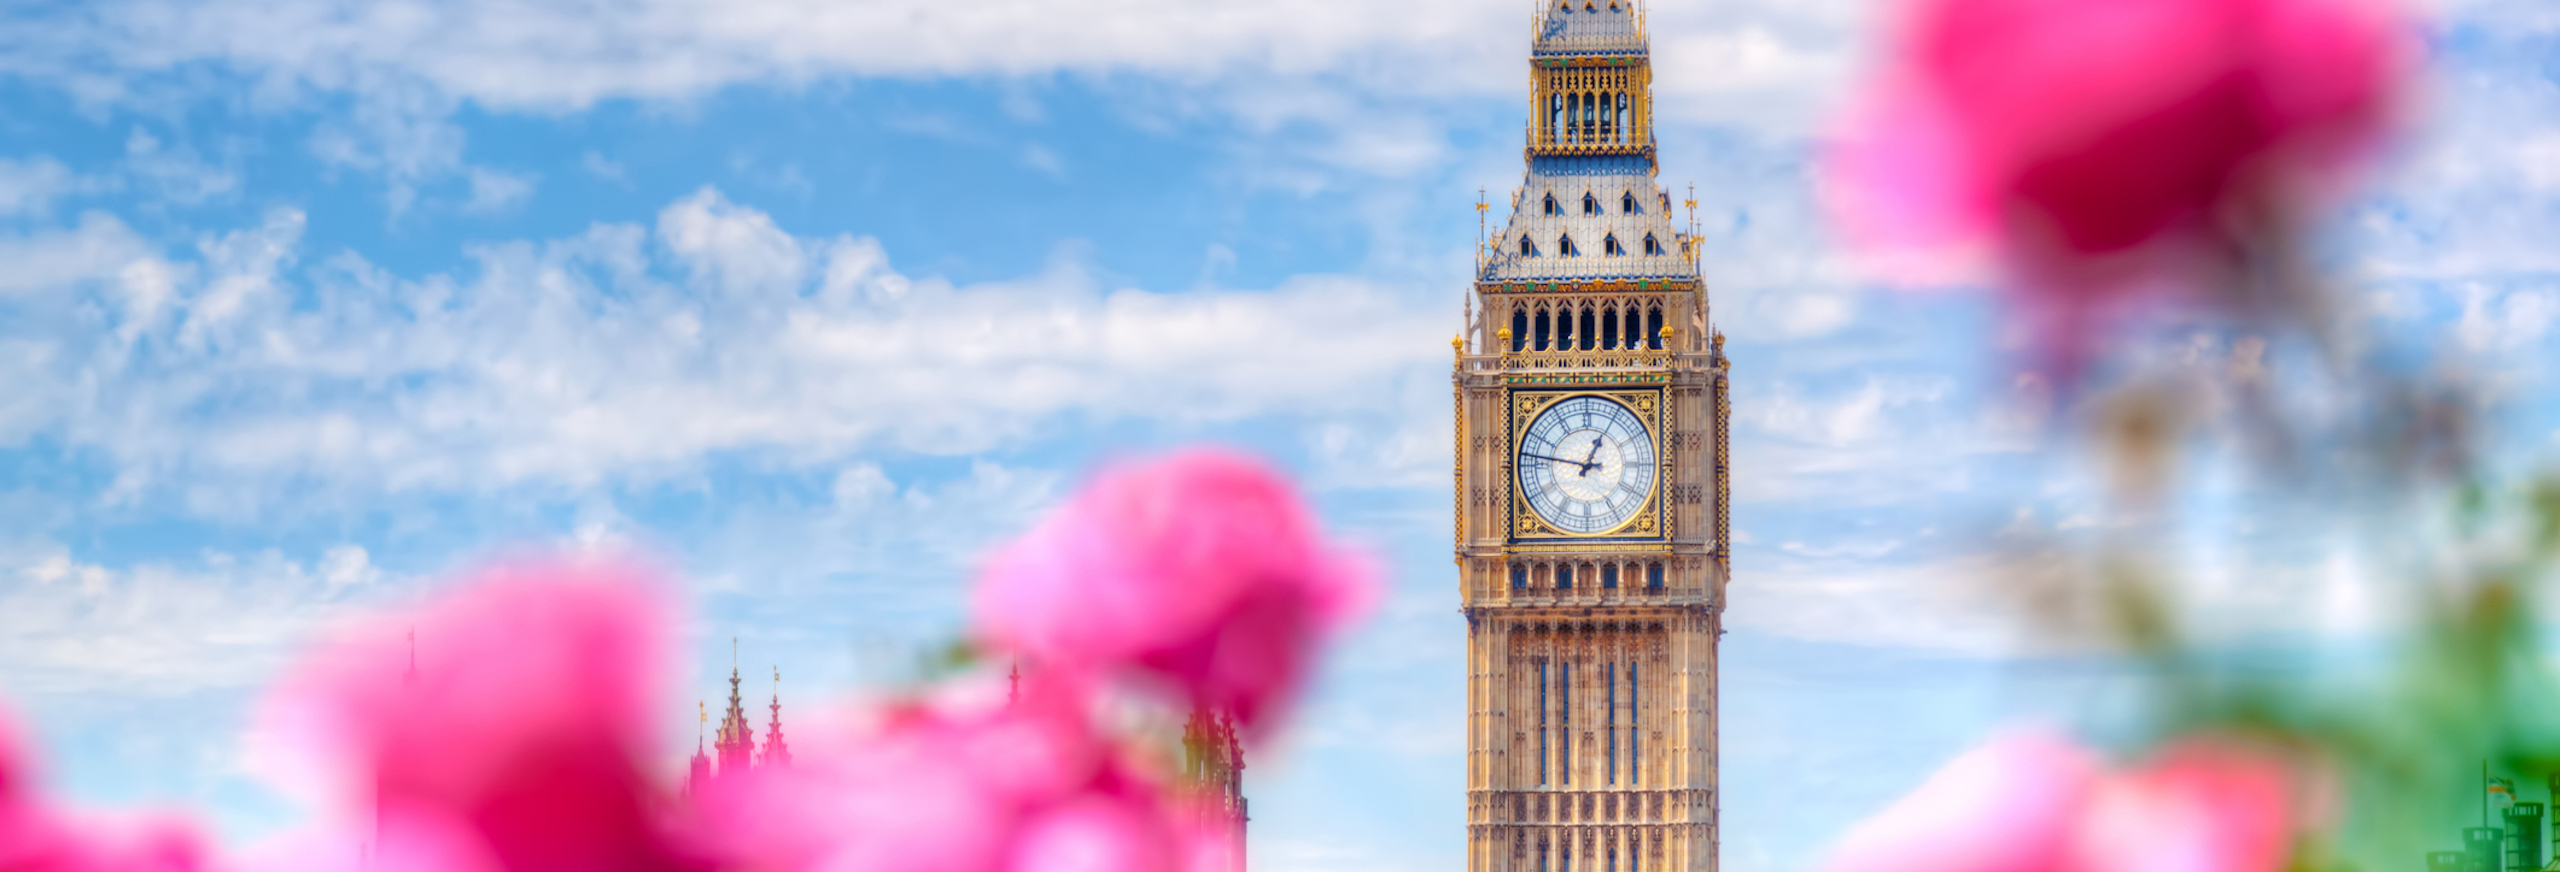 London Big Ben with spring flowers